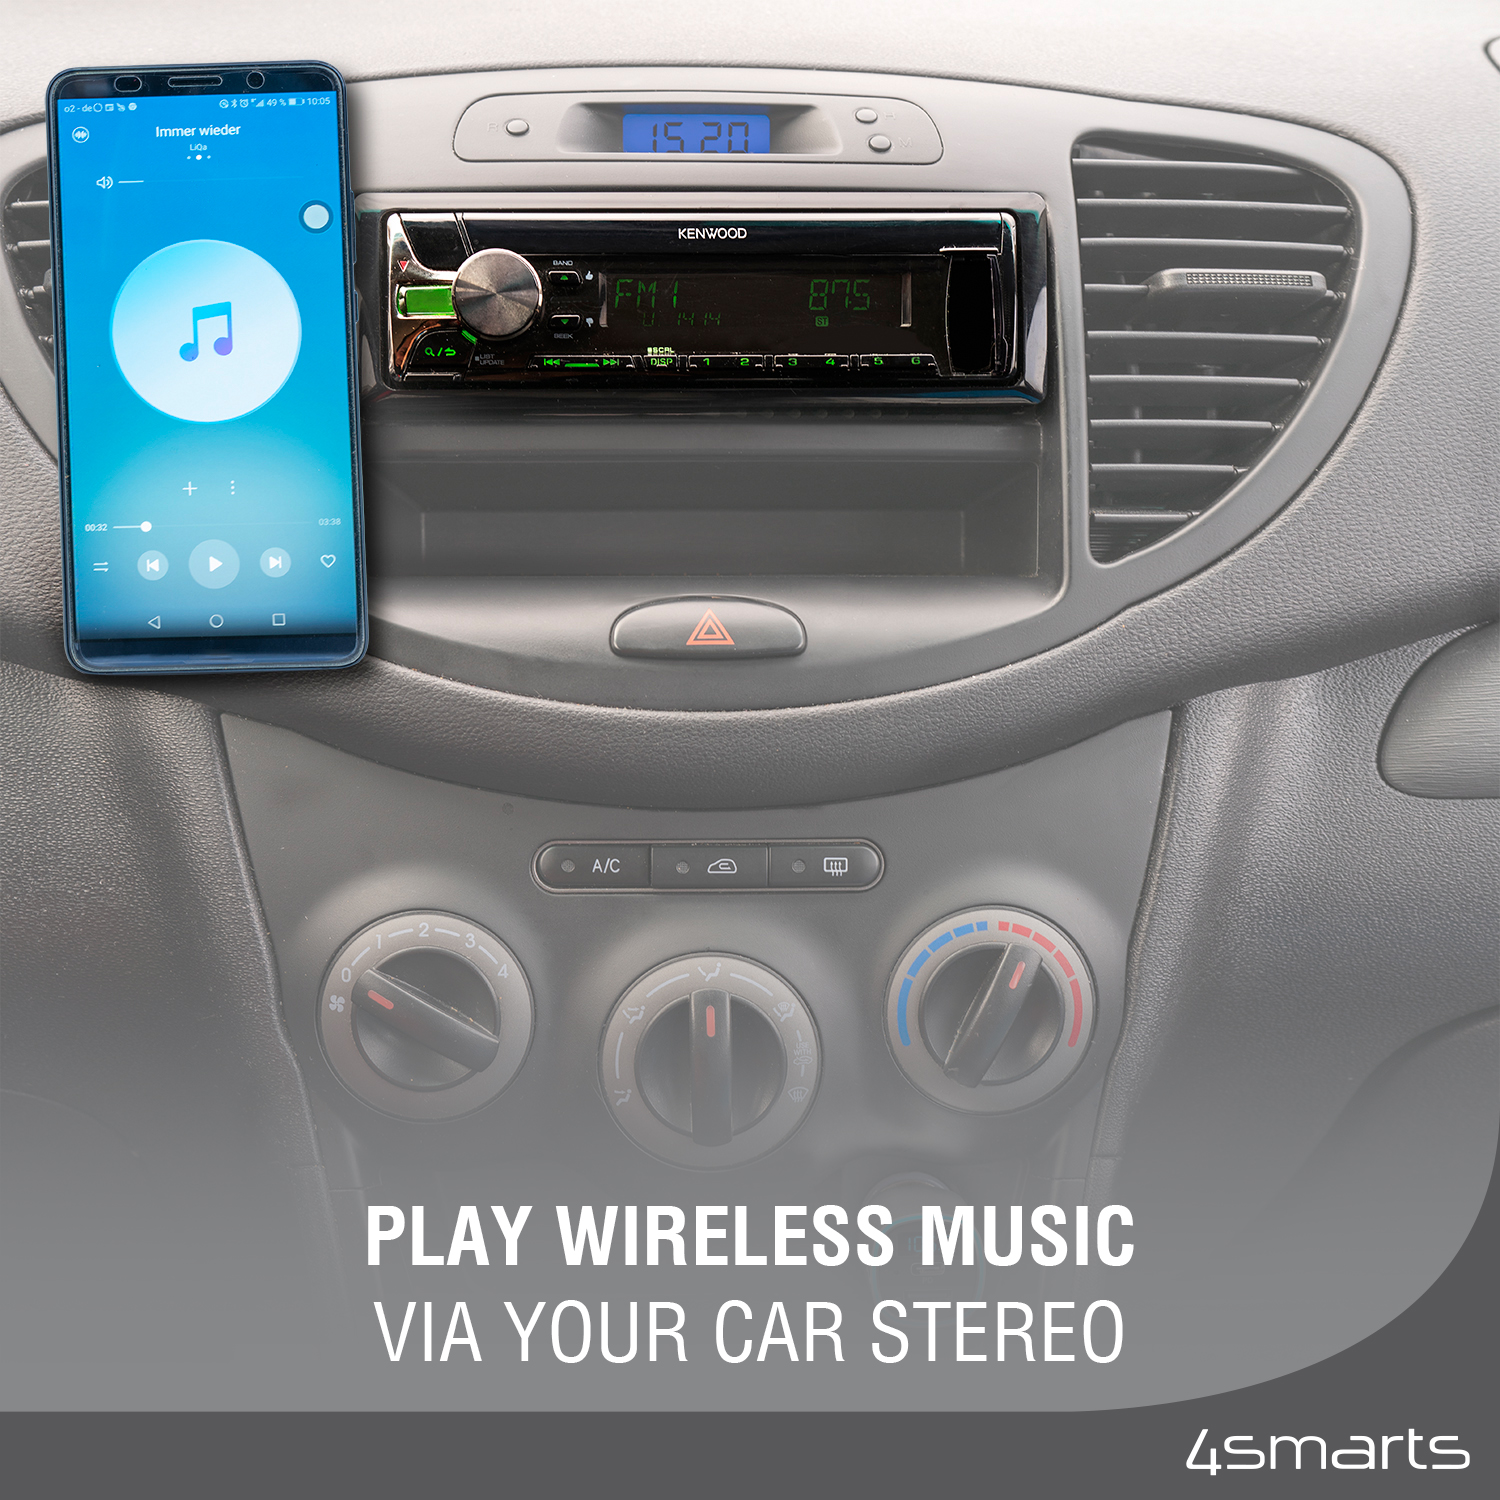 With the 4smarts Bluetooth Transmitter Media&Assist 2, wireless music playback via the car radio is very easy and fast.